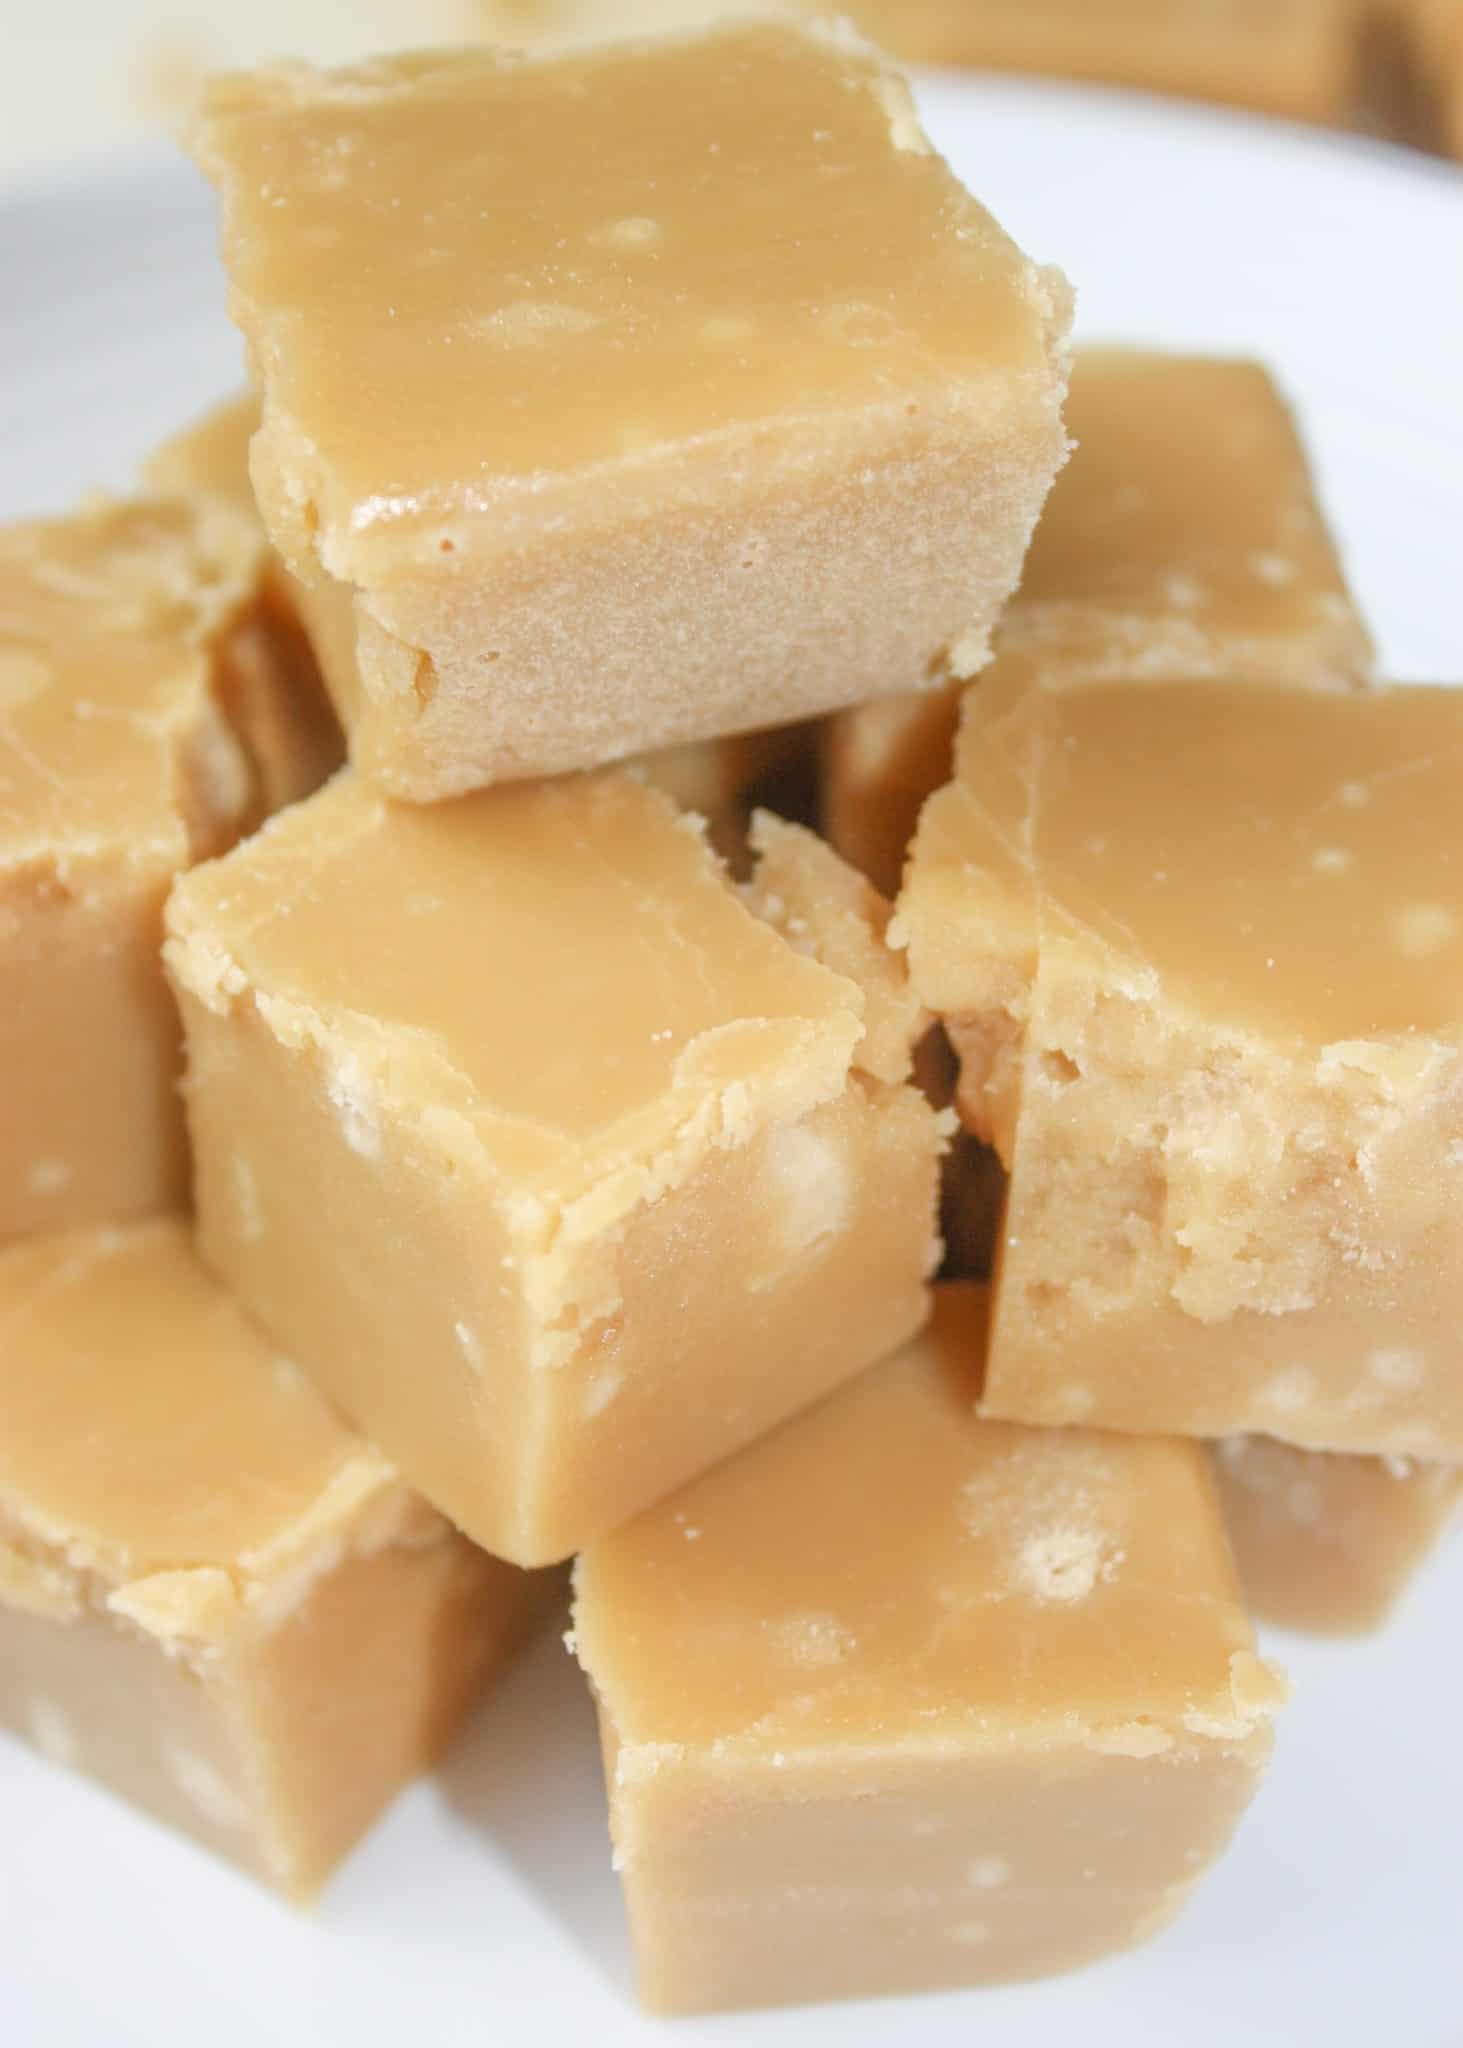 Maple Fudge is a creamy, decadent treat that will get you rave reviews.  This easy recipe does not require a candy thermometer and can be made in minutes. Then just let it harden and enjoy!